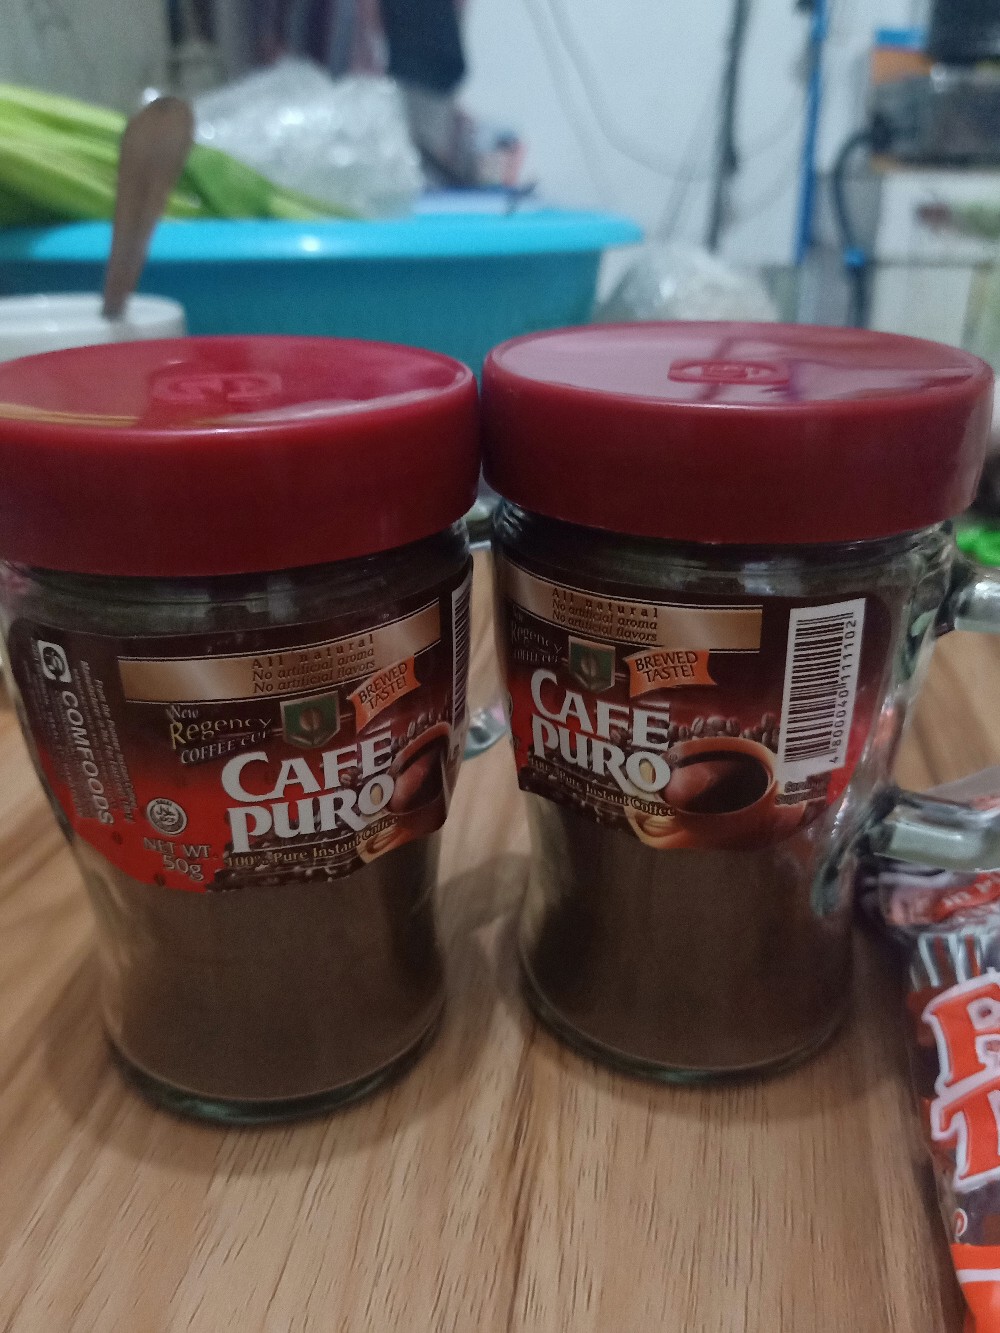 Cafe Puro Instant Coffee In Regency Cup 50g | Shopee ...